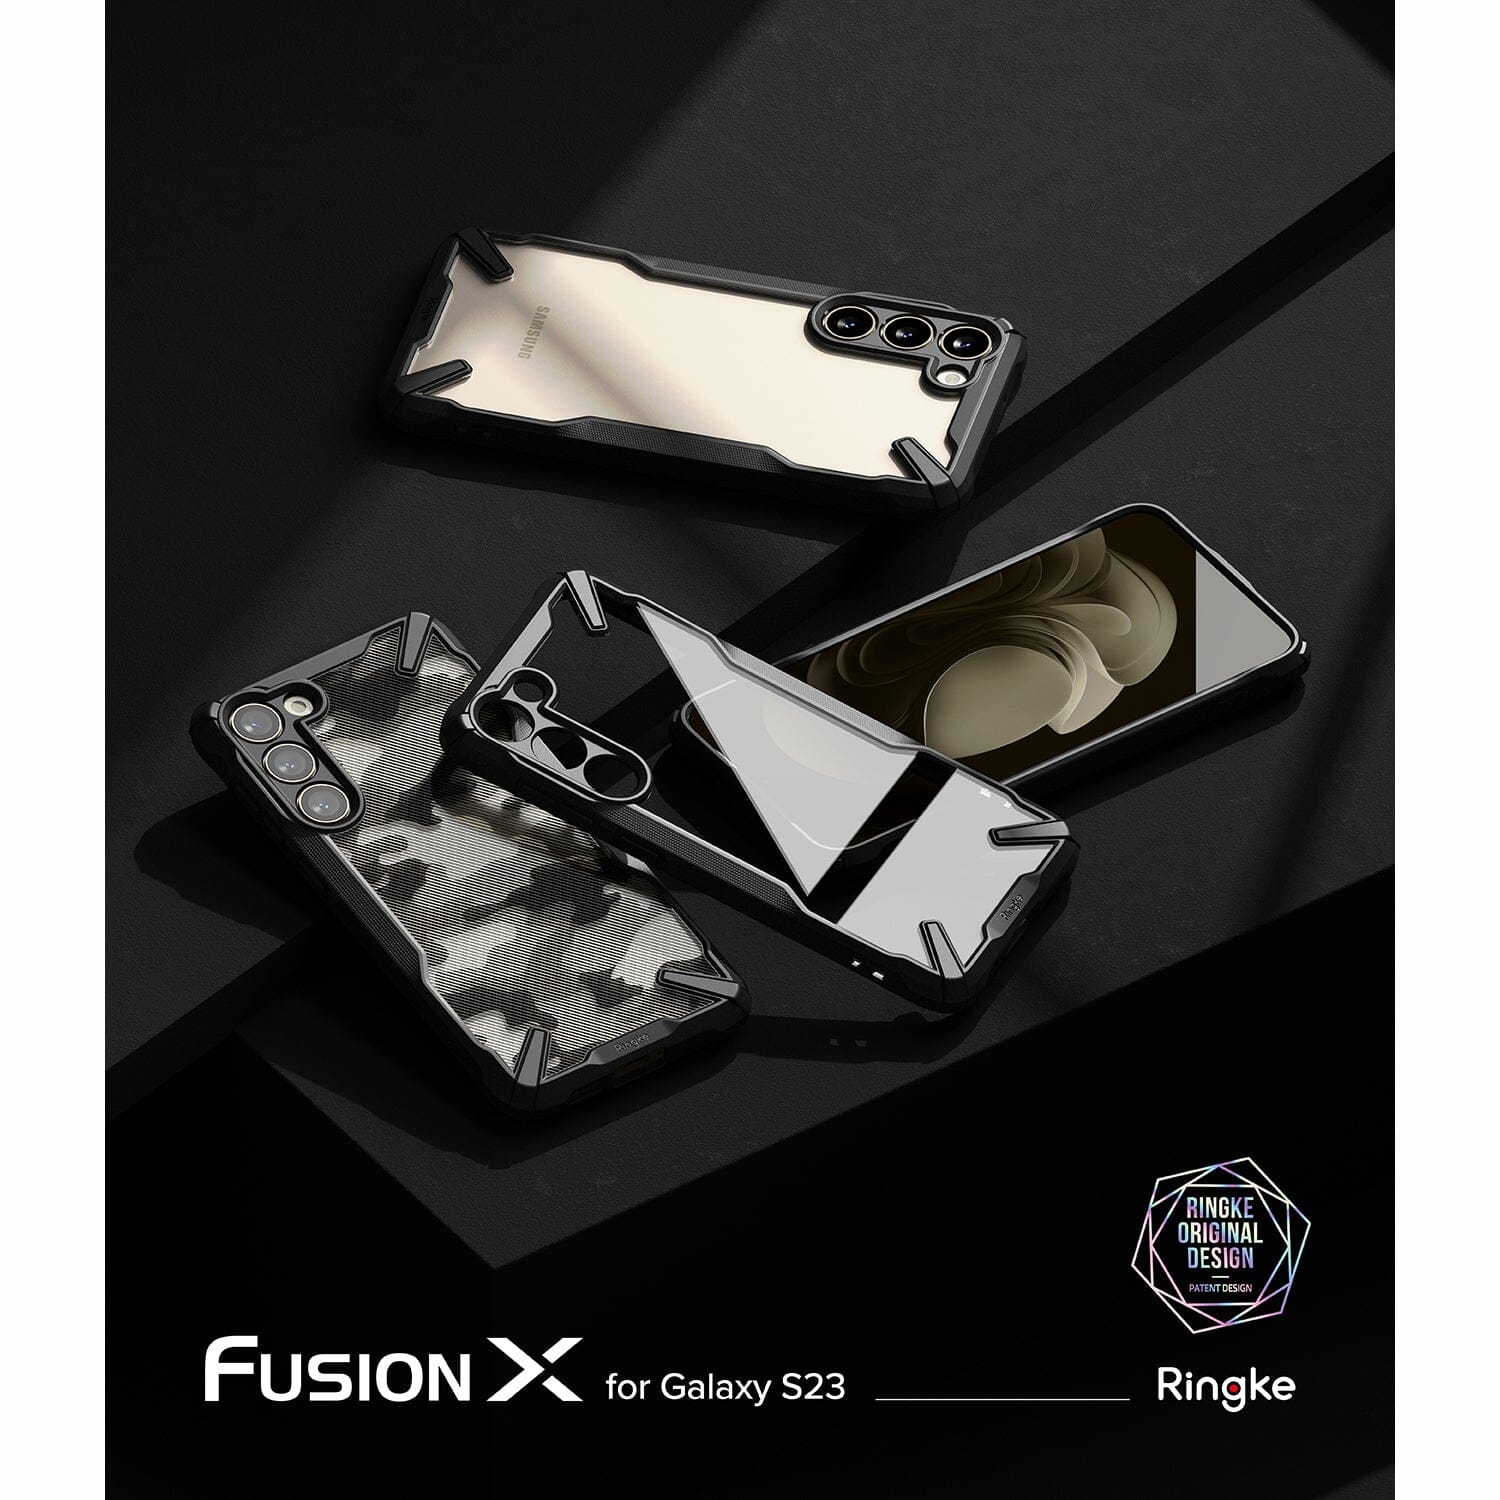 Ringke Fusion X Case for Samsung Galaxy S23/S23 Plus/S23 Ultra, Black ONE2WORLD 